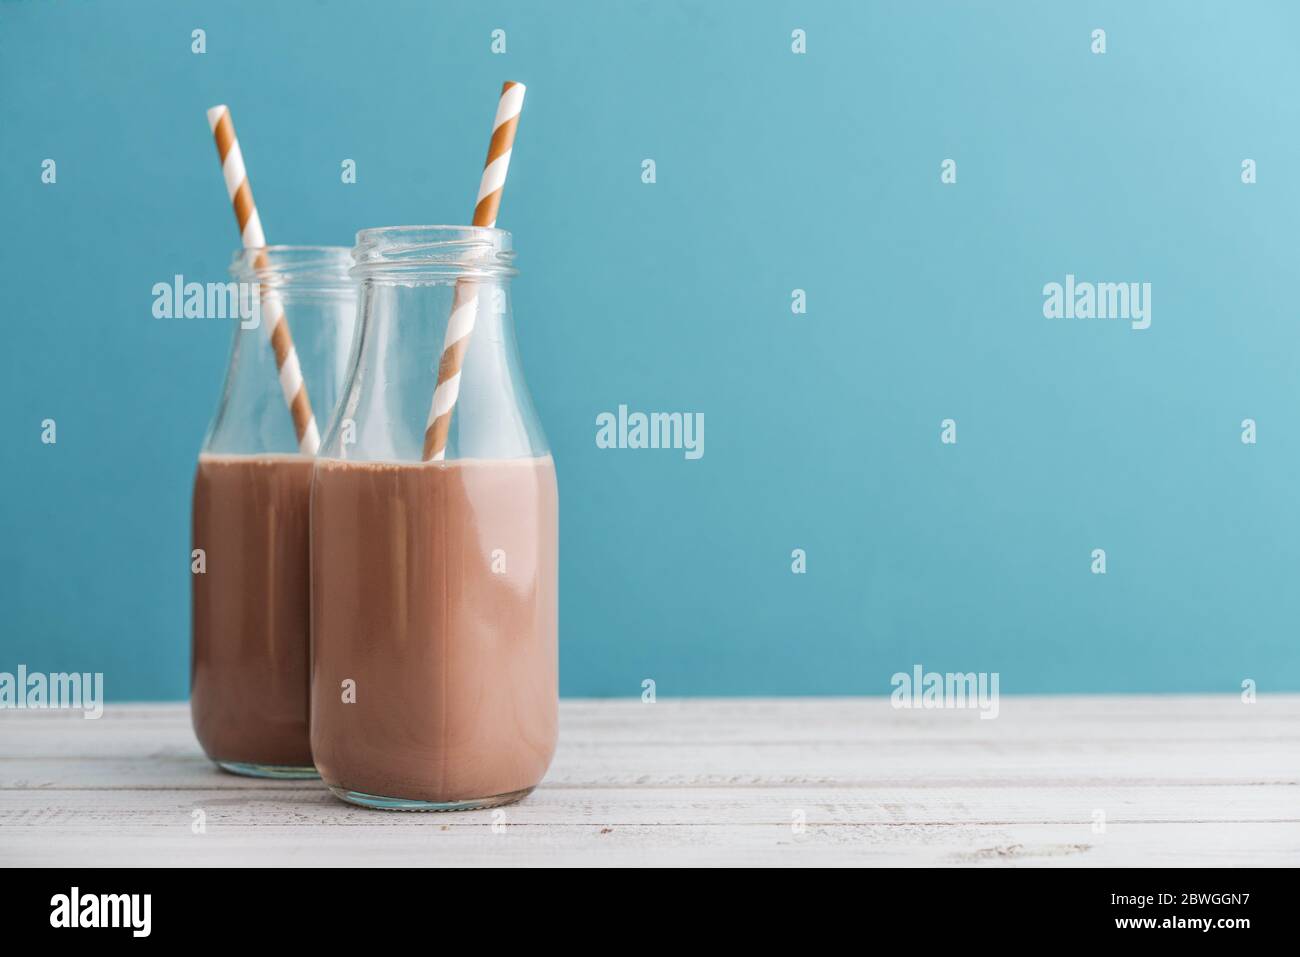 Two bottles chocolate milk with drinking straws on blue background ...